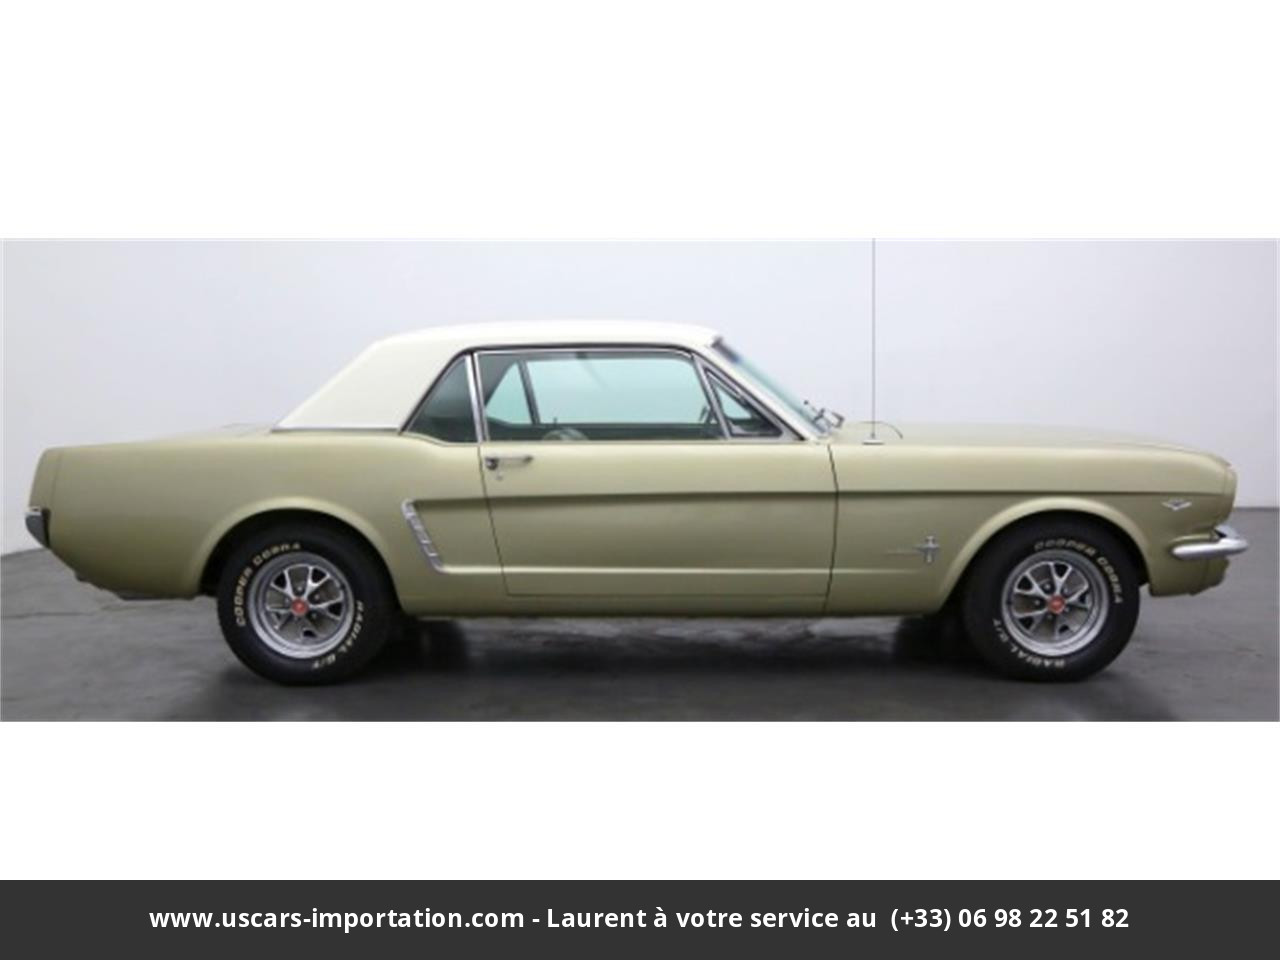 Ford Mustang Code a v8 1965 prix tout compris